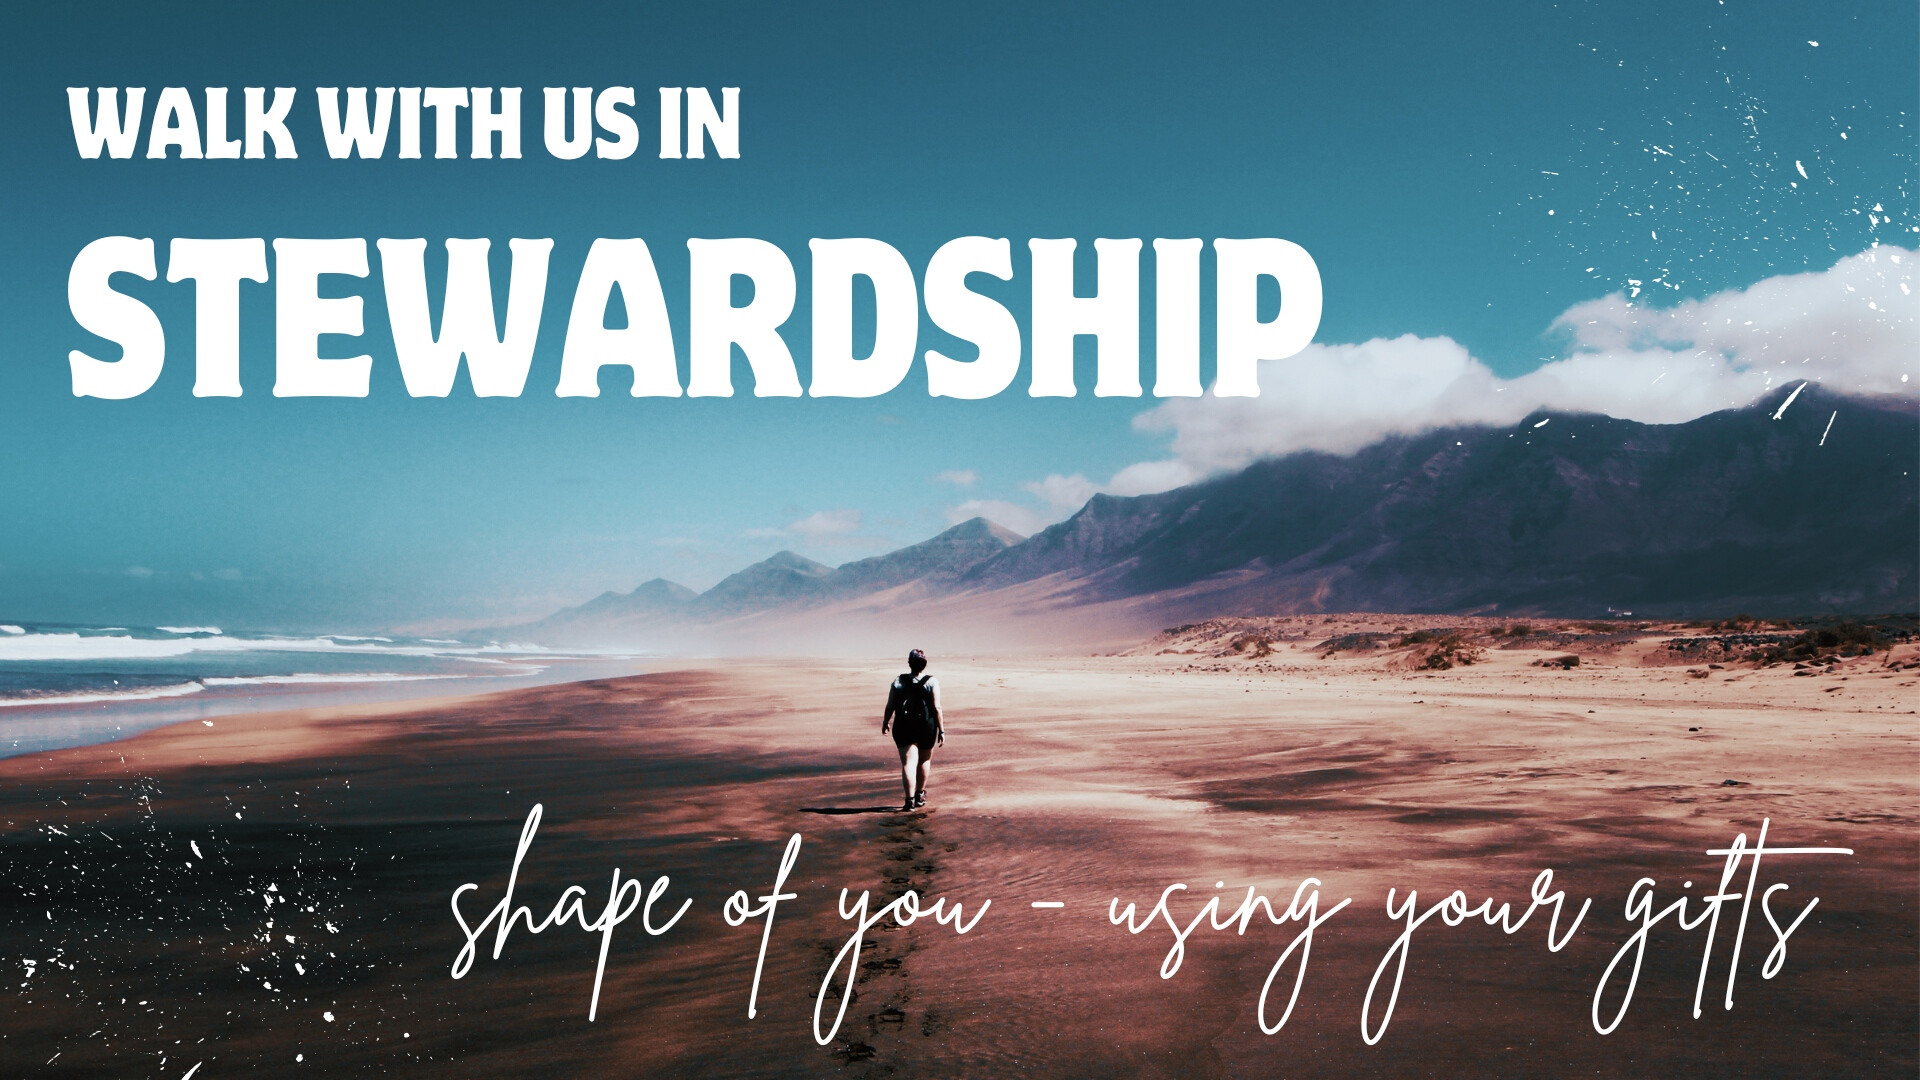 Walk With Us in Stewardship - Shape of You